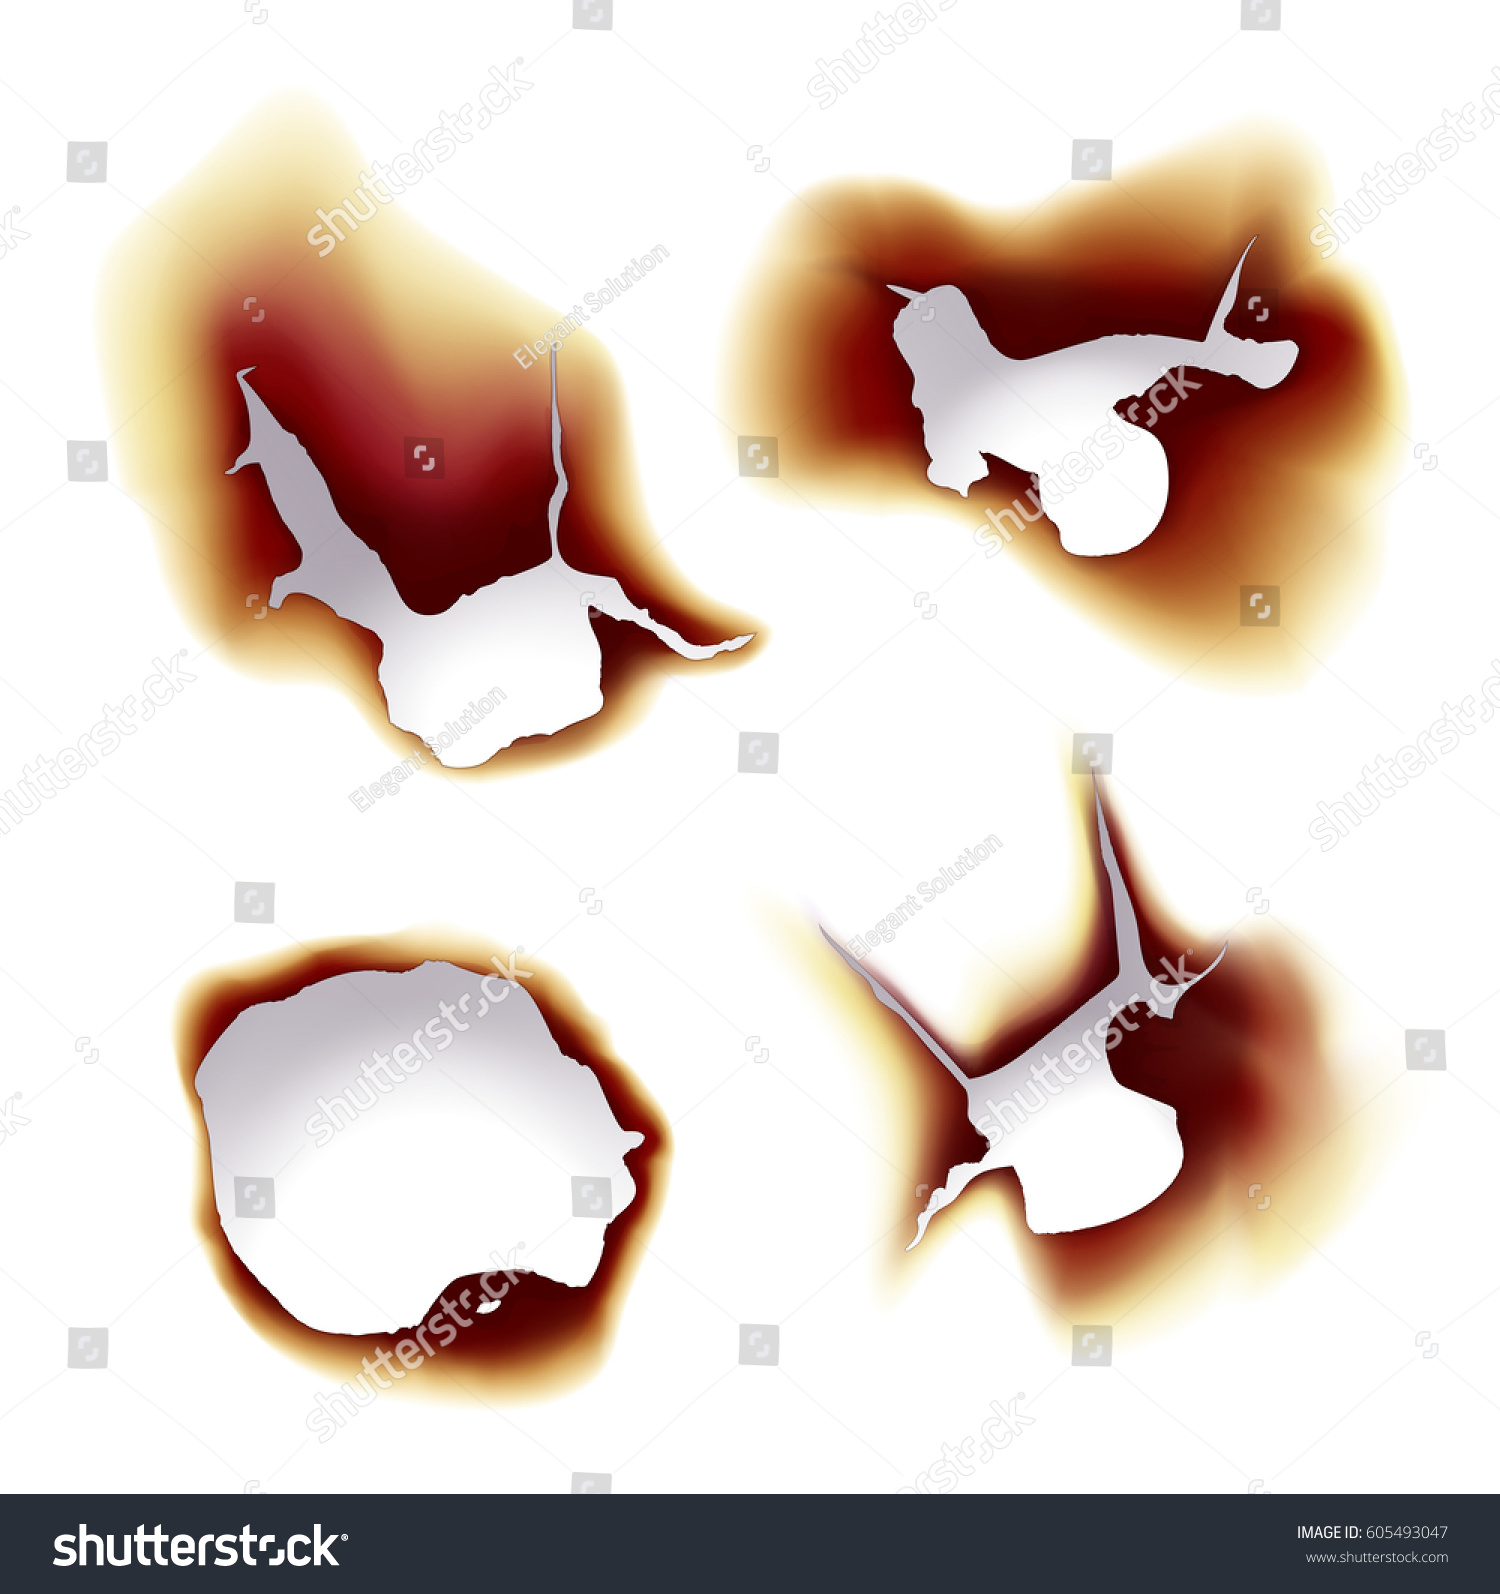 Set Isolated Sheets Paper On Fire Stock Vector 605493047 - Shutterstock